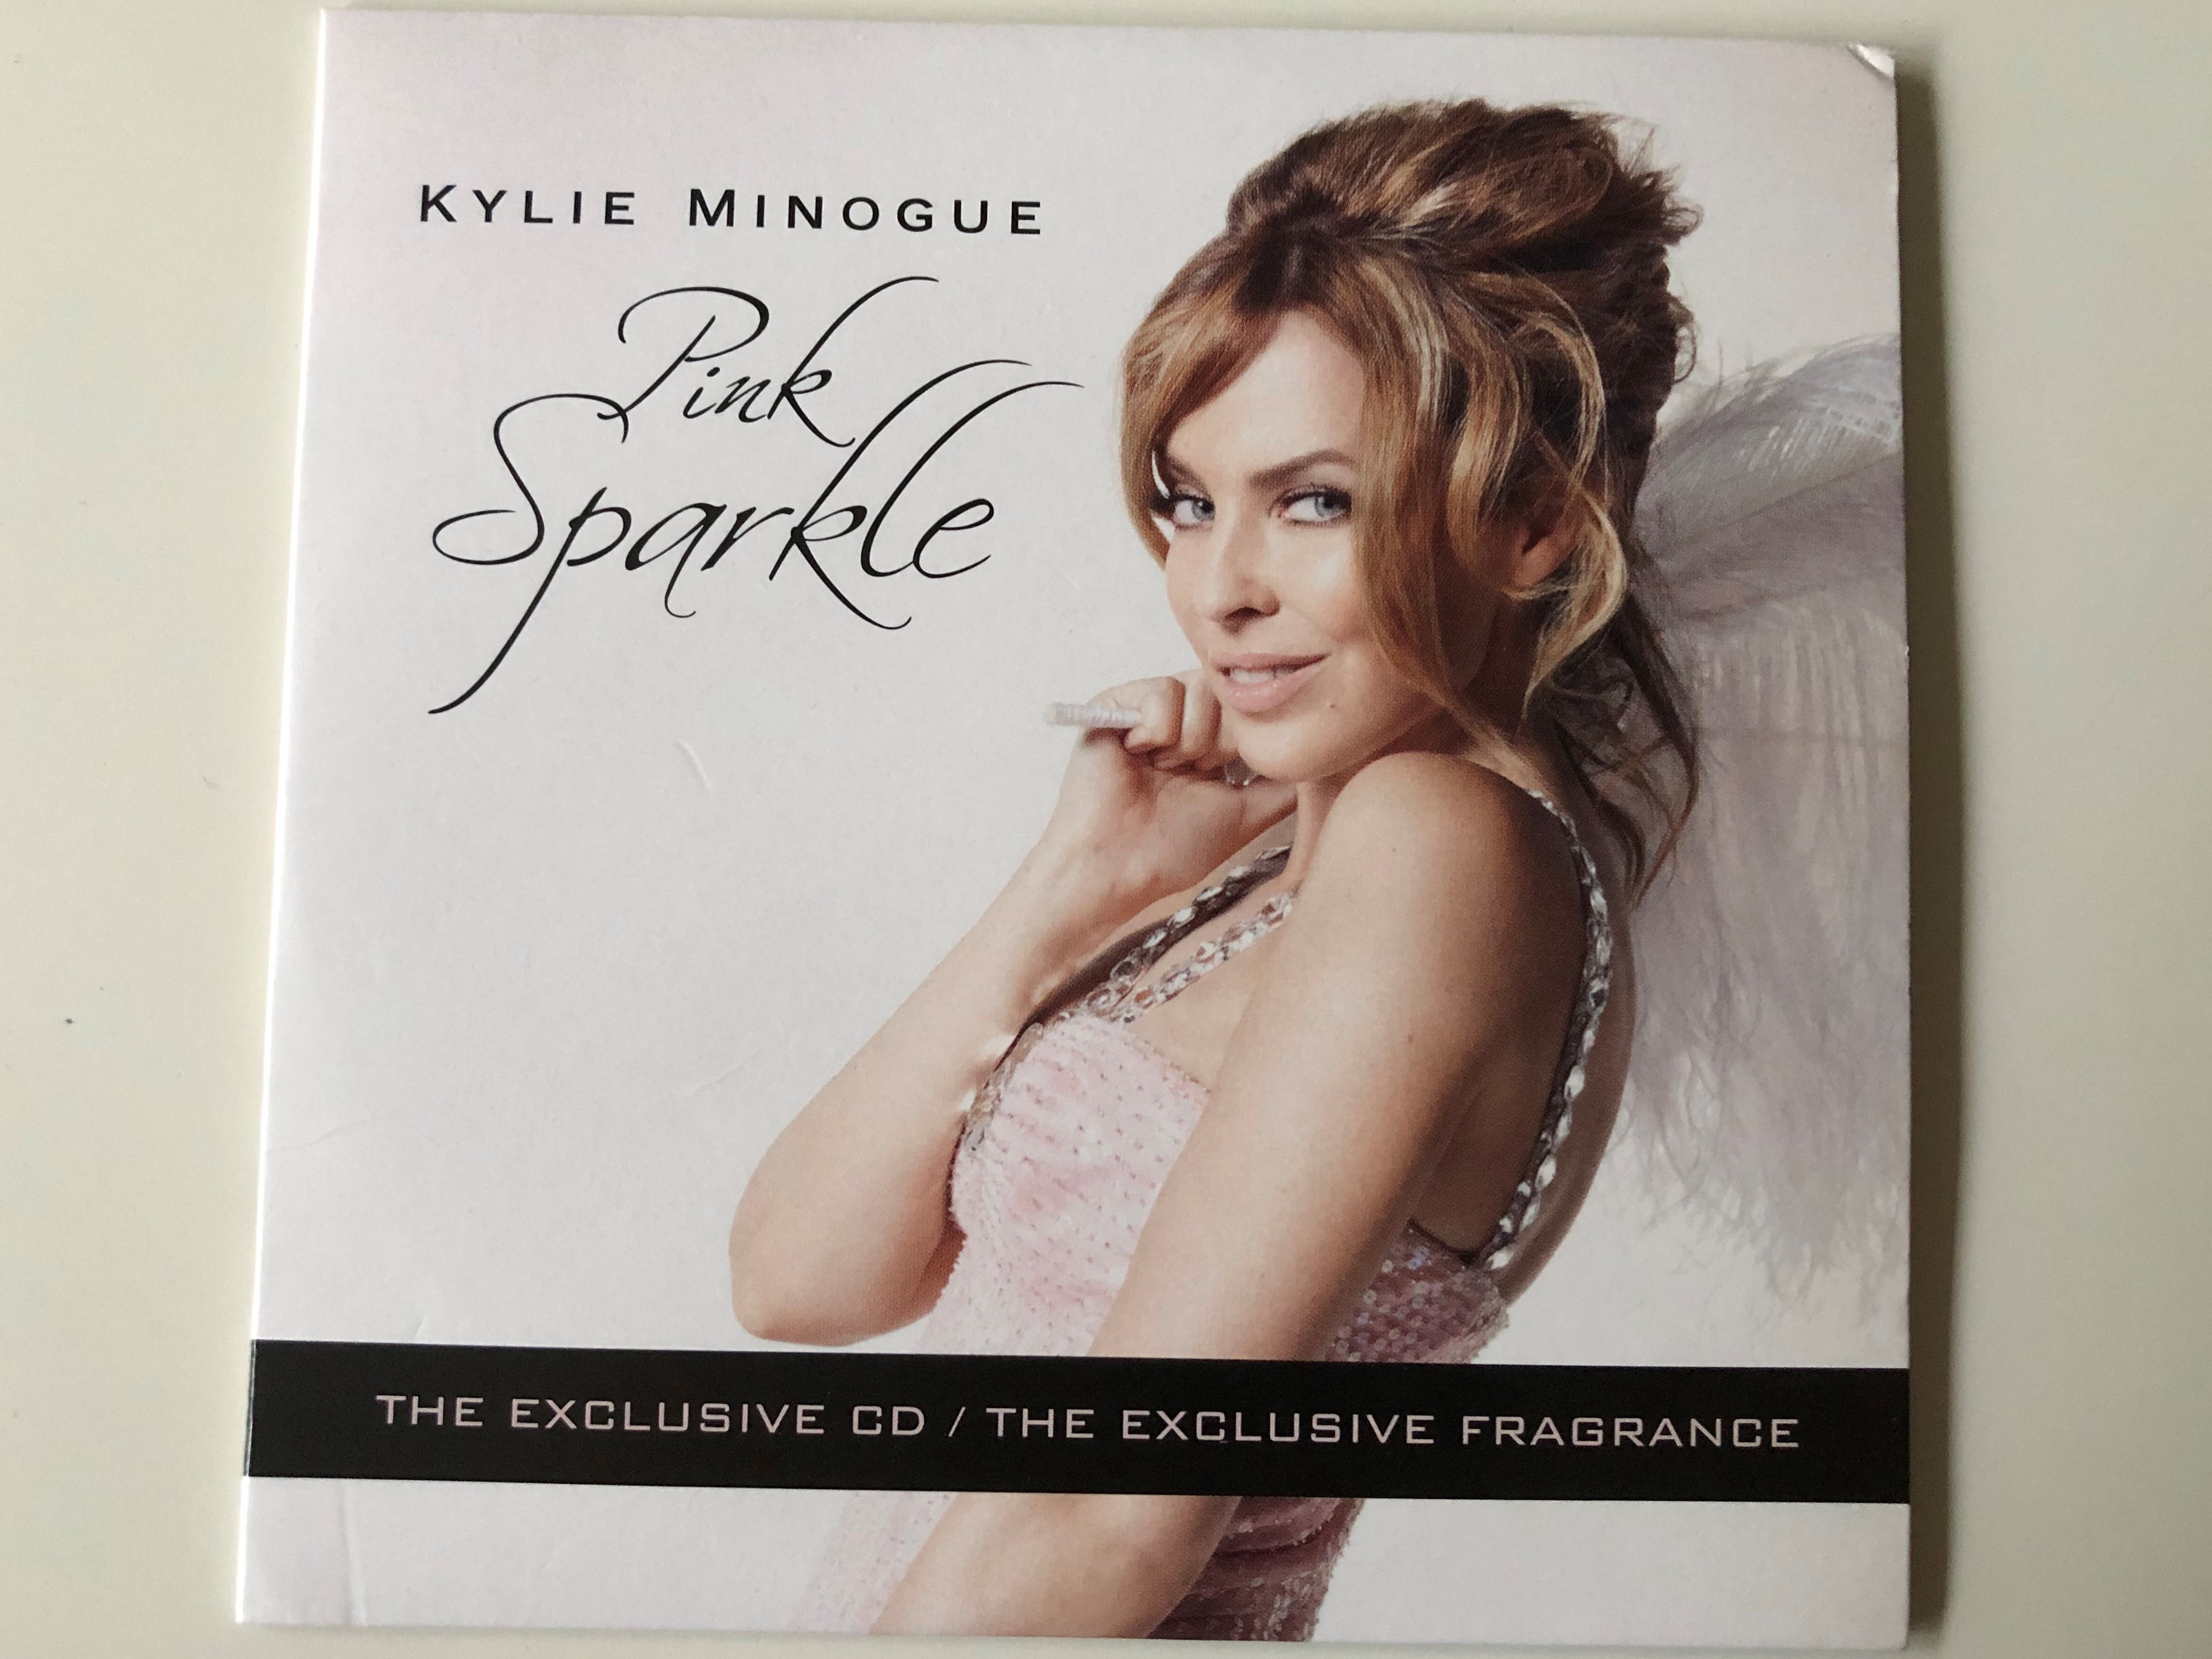 kylie-minogue-pink-sparkle-the-exclusive-cd-the-exclusive-fragrance-parlophone-audio-cd-2010-3607345564722-1-.jpg